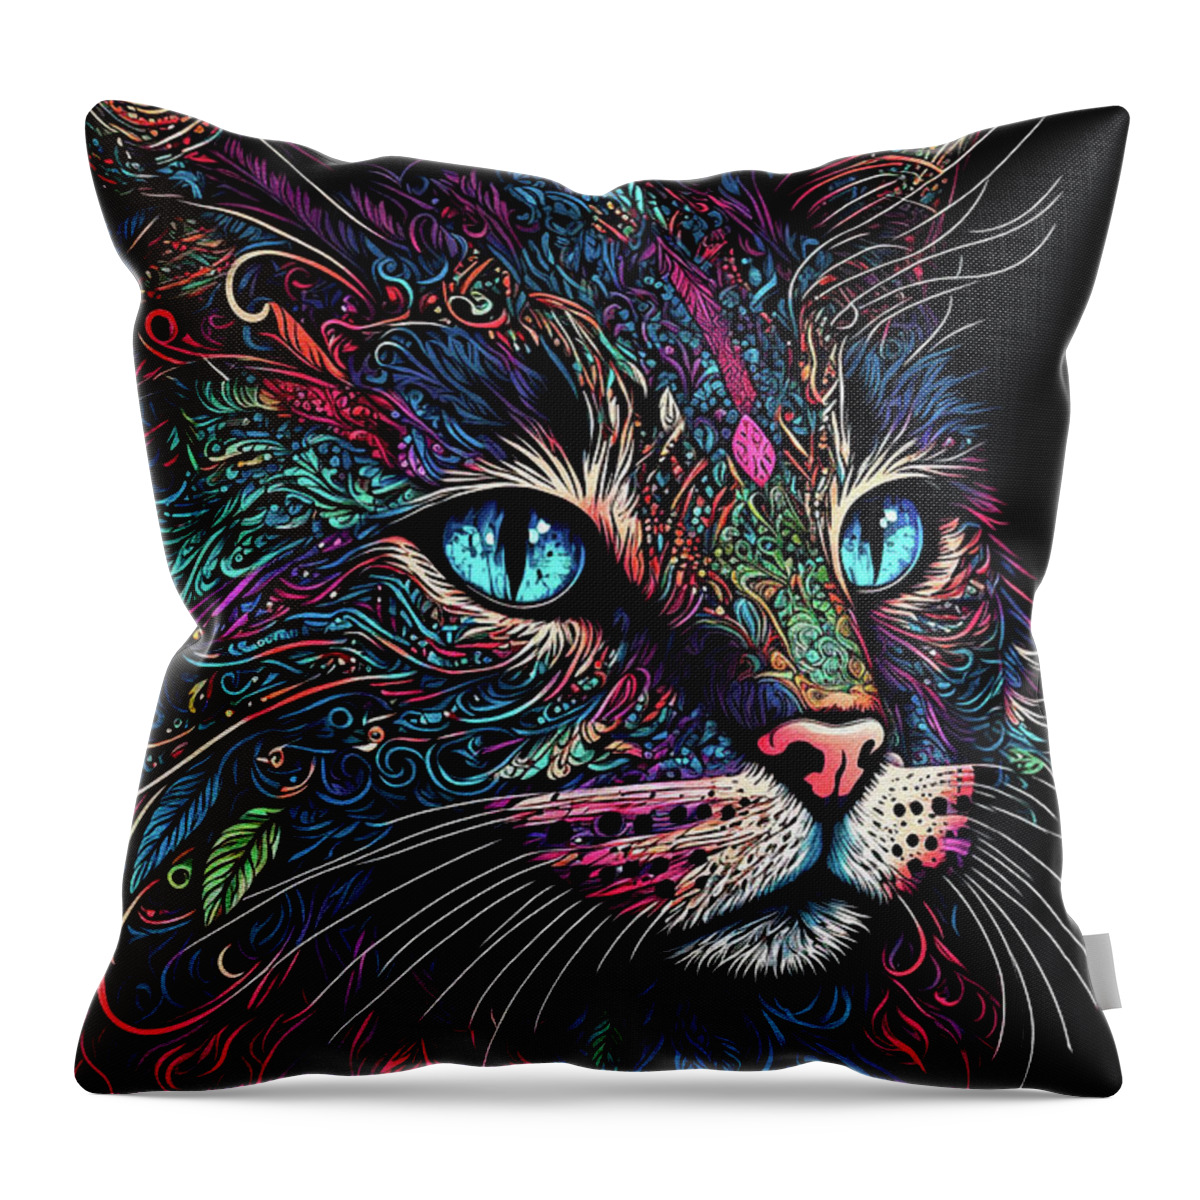 Colorful Cats Throw Pillow featuring the digital art Colorful Cat Closeup by Peggy Collins